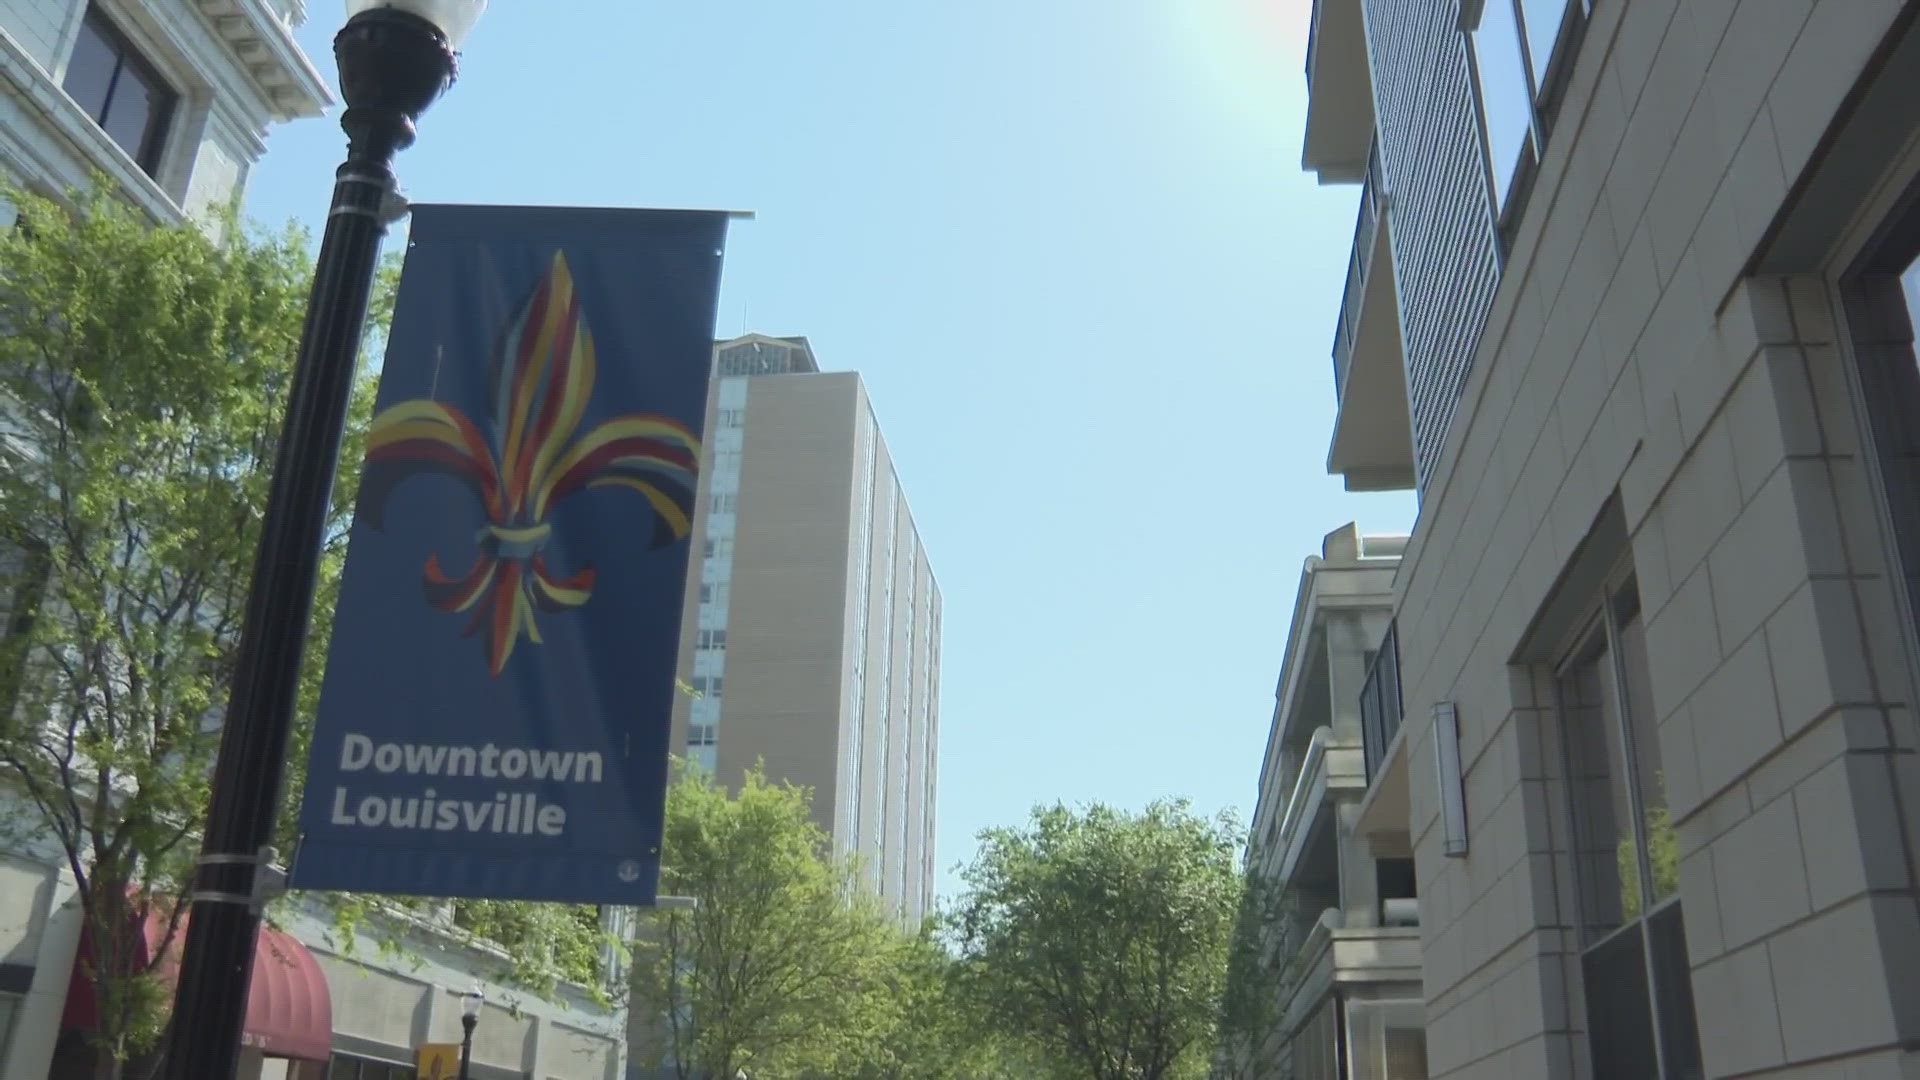 Downtown Louisville has struggled to recover since the 2020 COVID-19 shutdown and the 2020 protests.